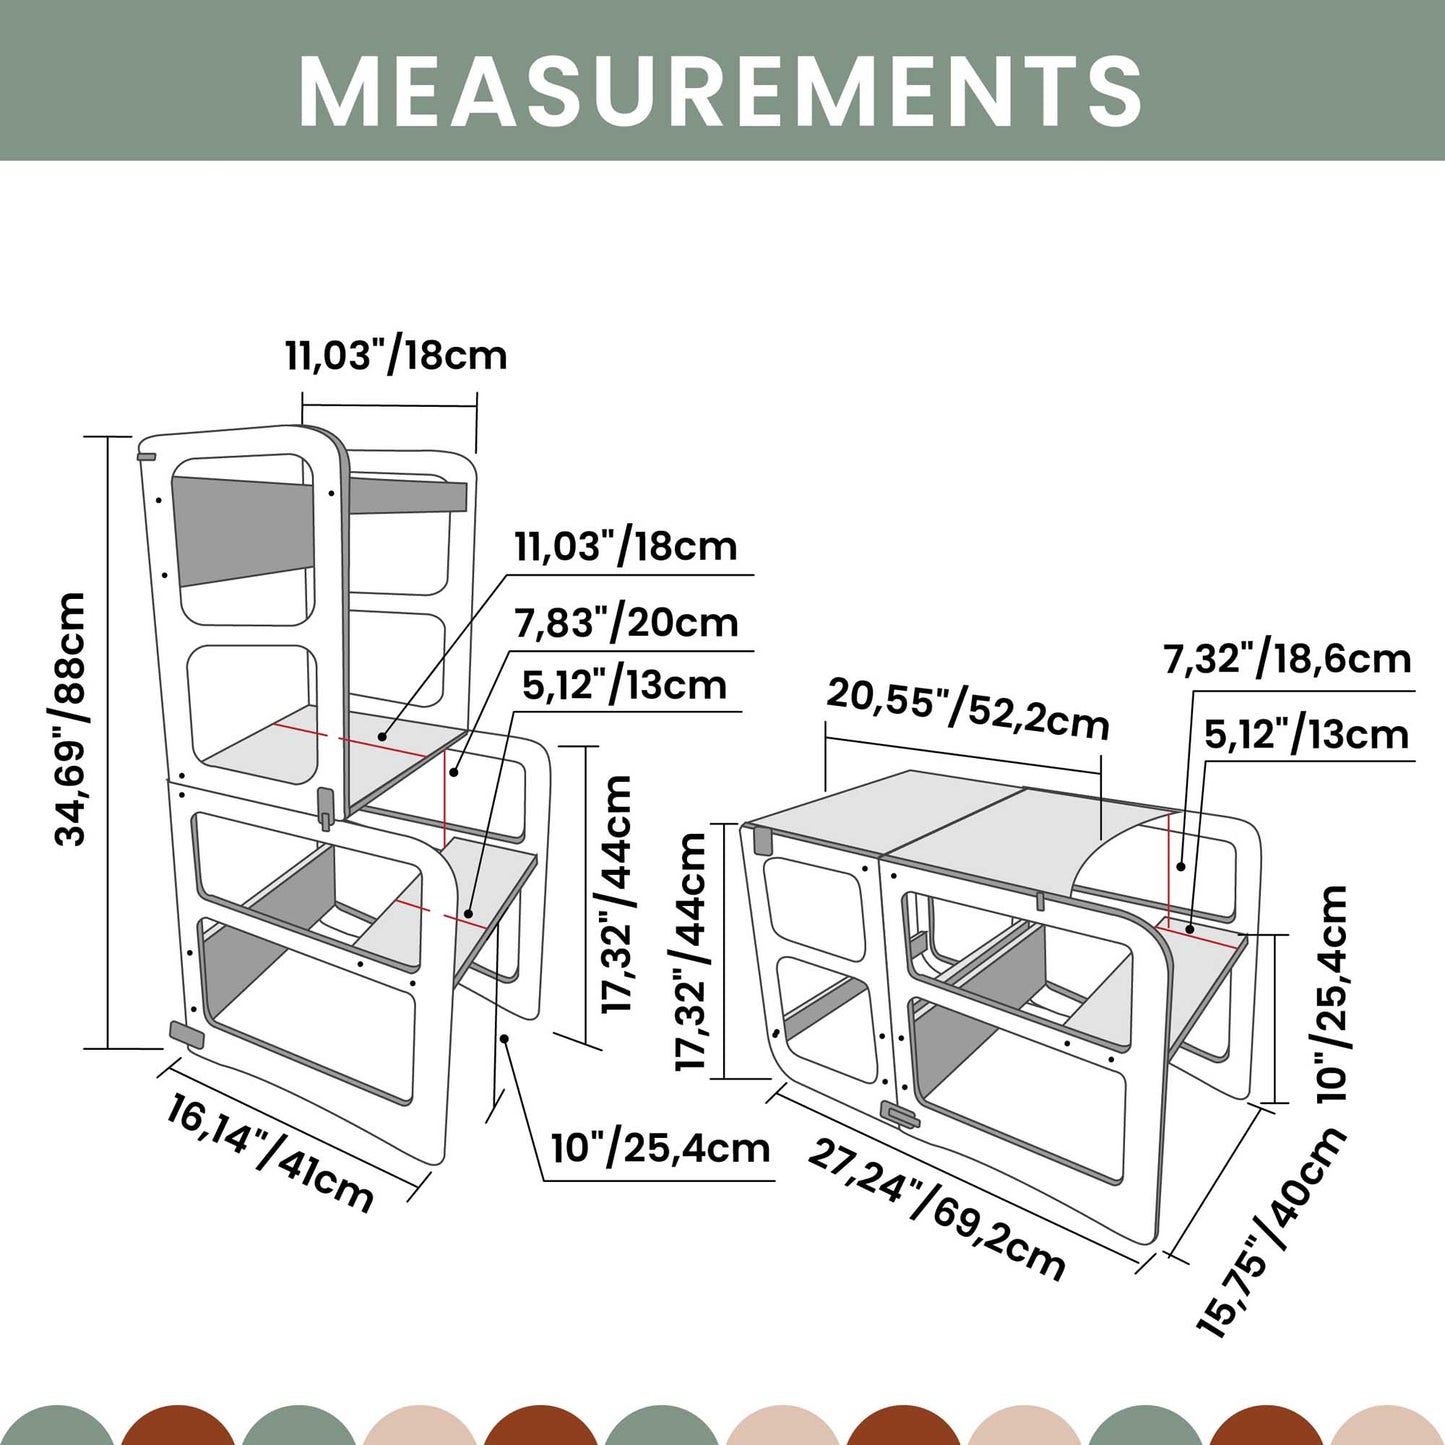 A diagram showing the measurements of a 2-in-1 transformable kitchen tower - table and chair set.